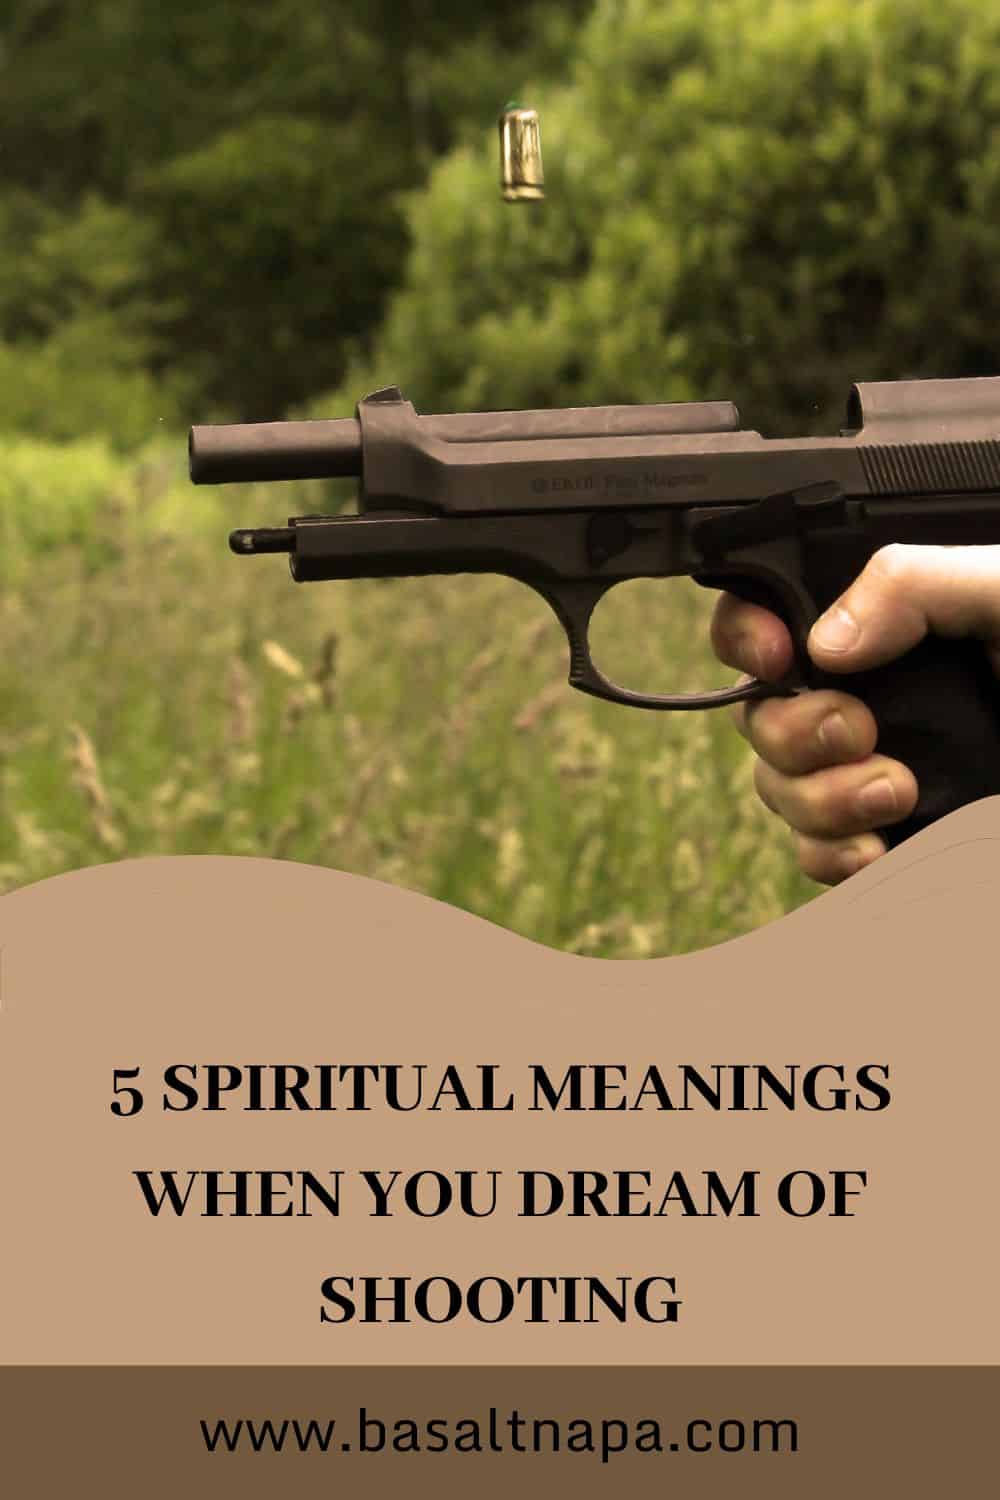 5 Spiritual Meanings When You Dream of Shooting